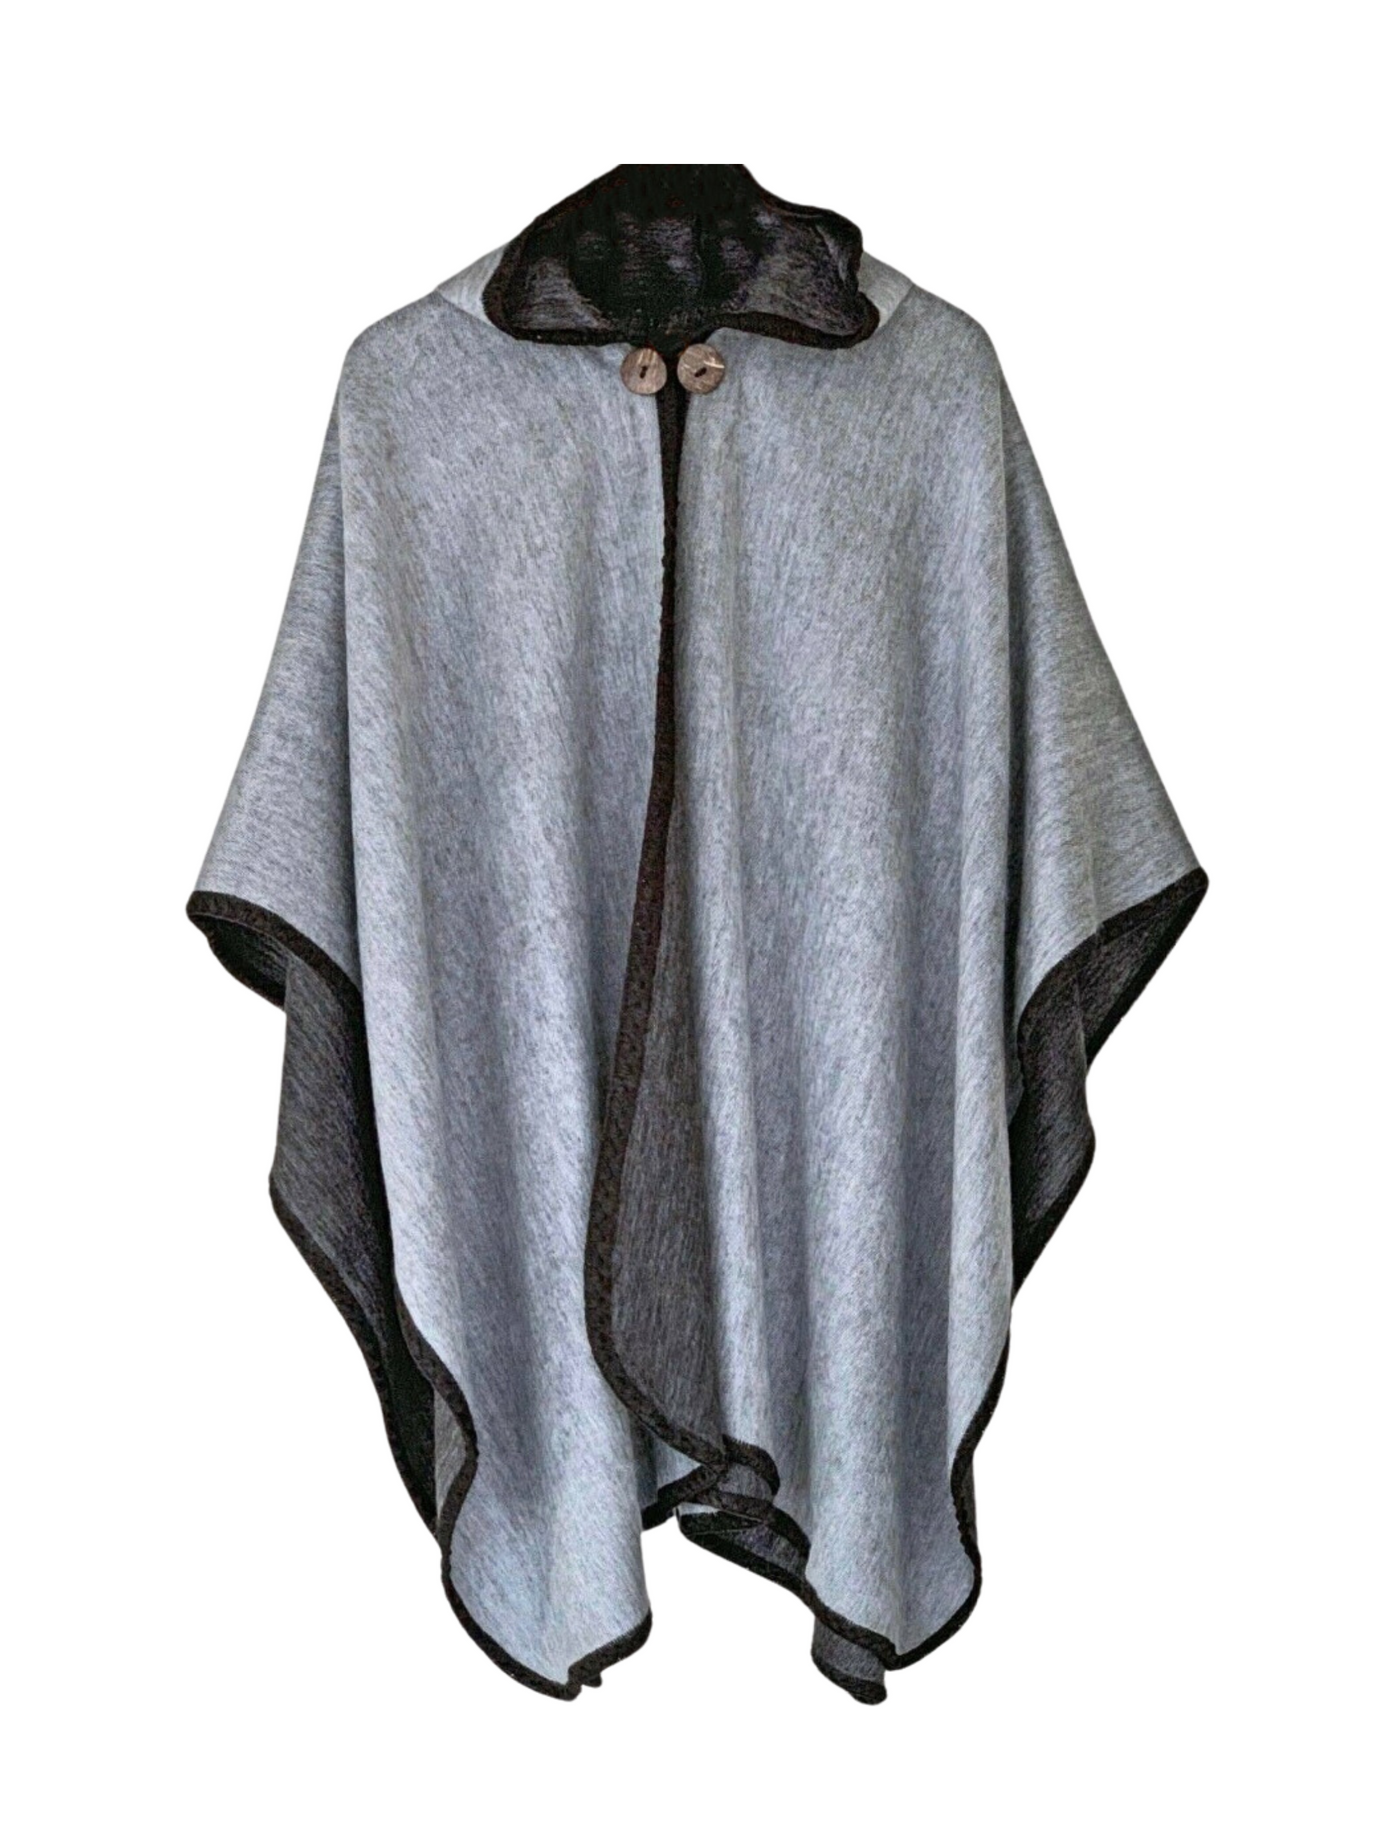 Pucallpa Unisex Hooded Cape Poncho